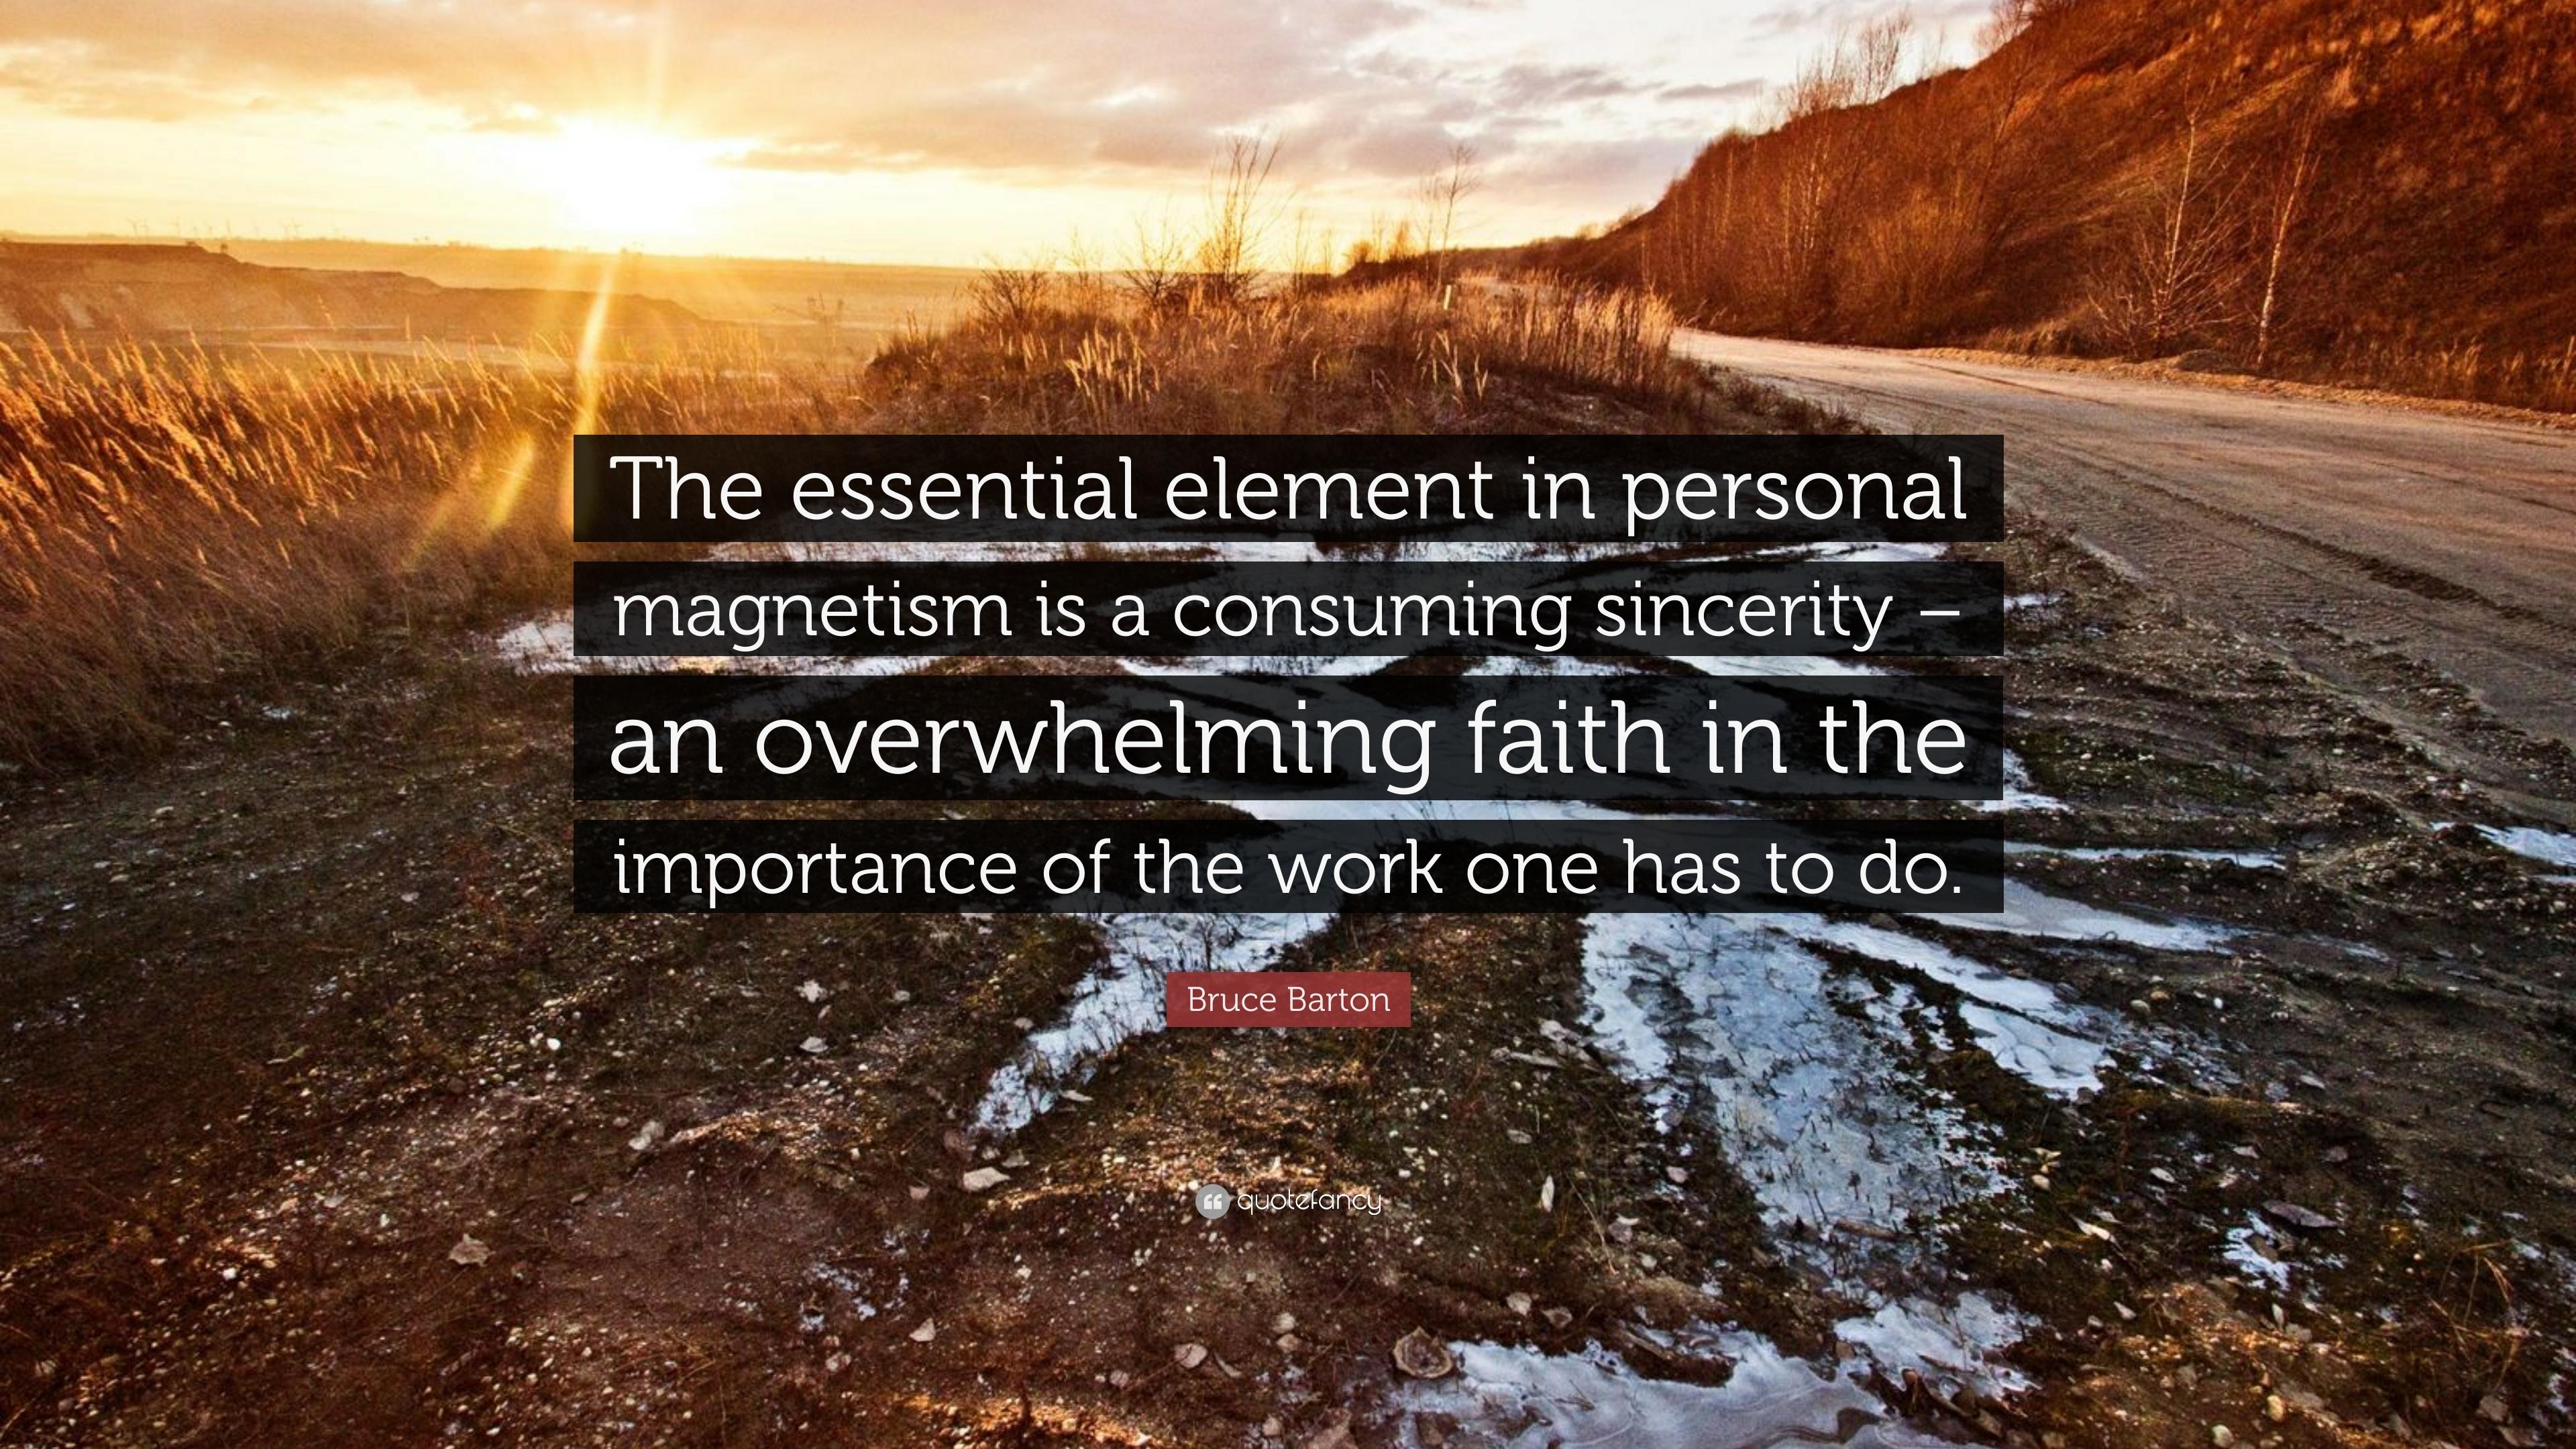 Bruce Barton Quote: “The essential element in personal